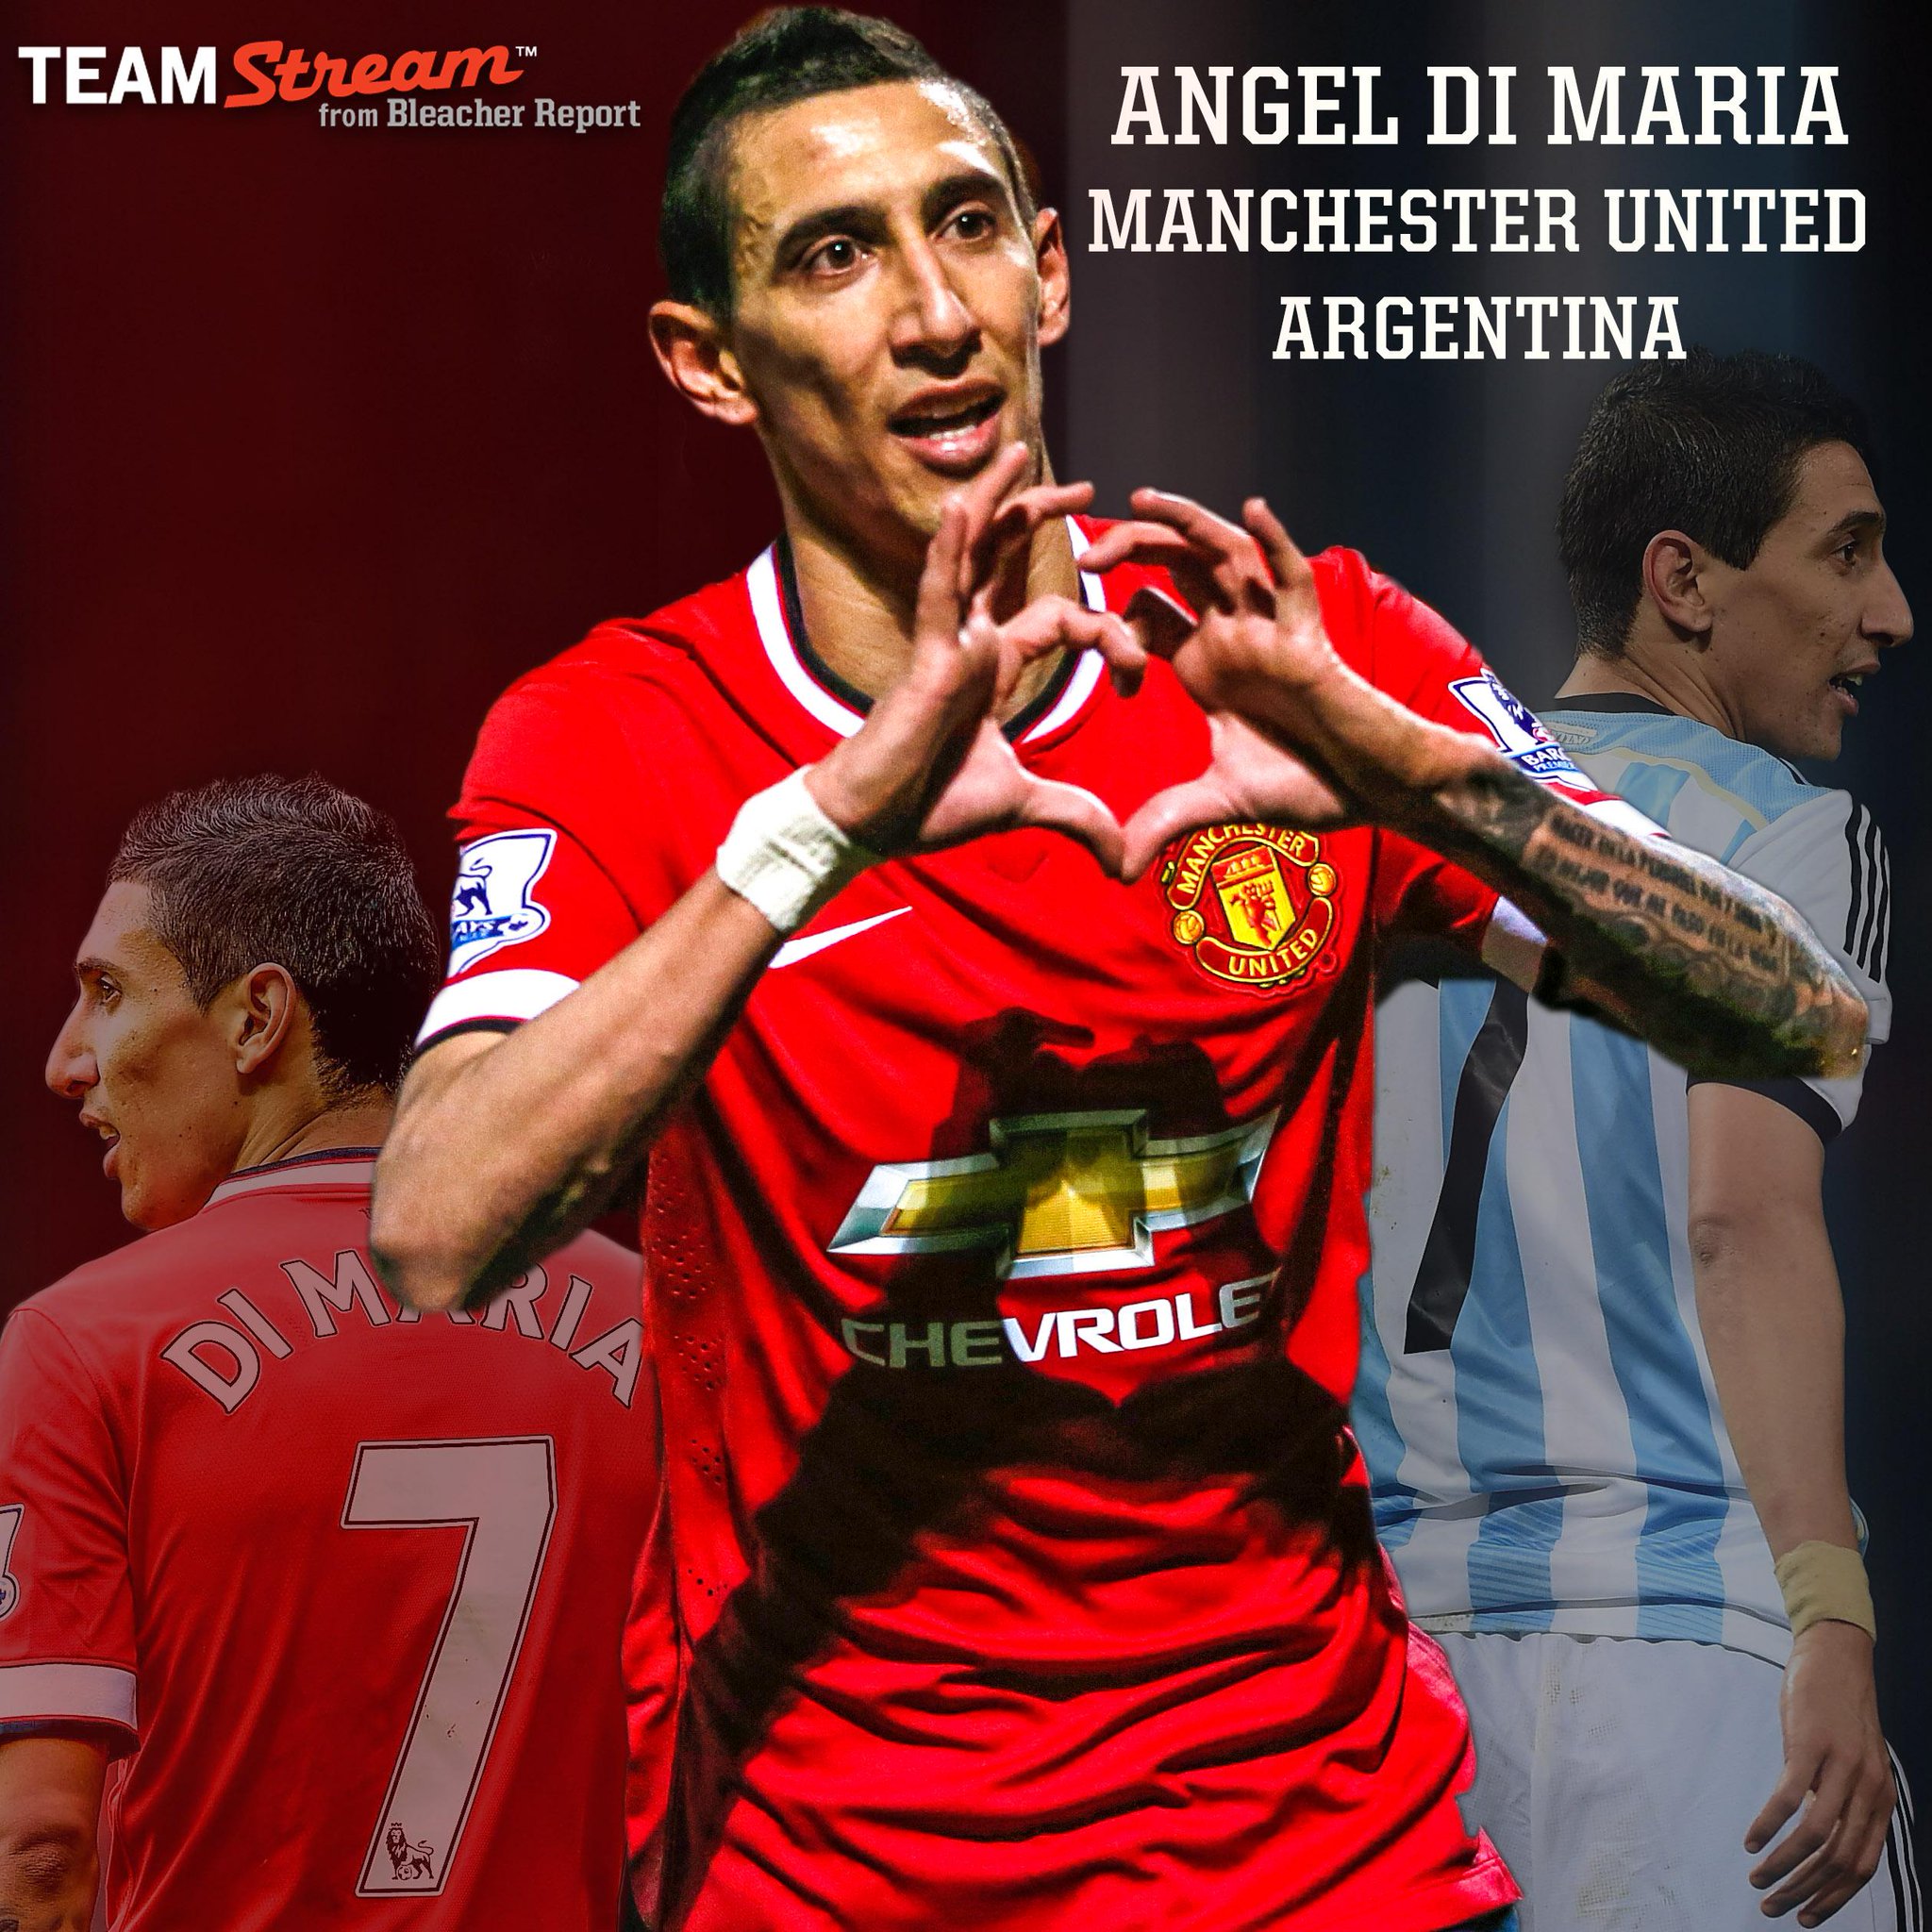   Happy 27th birthday Angel Di Maria! looks like dobby from Harry potter on crack